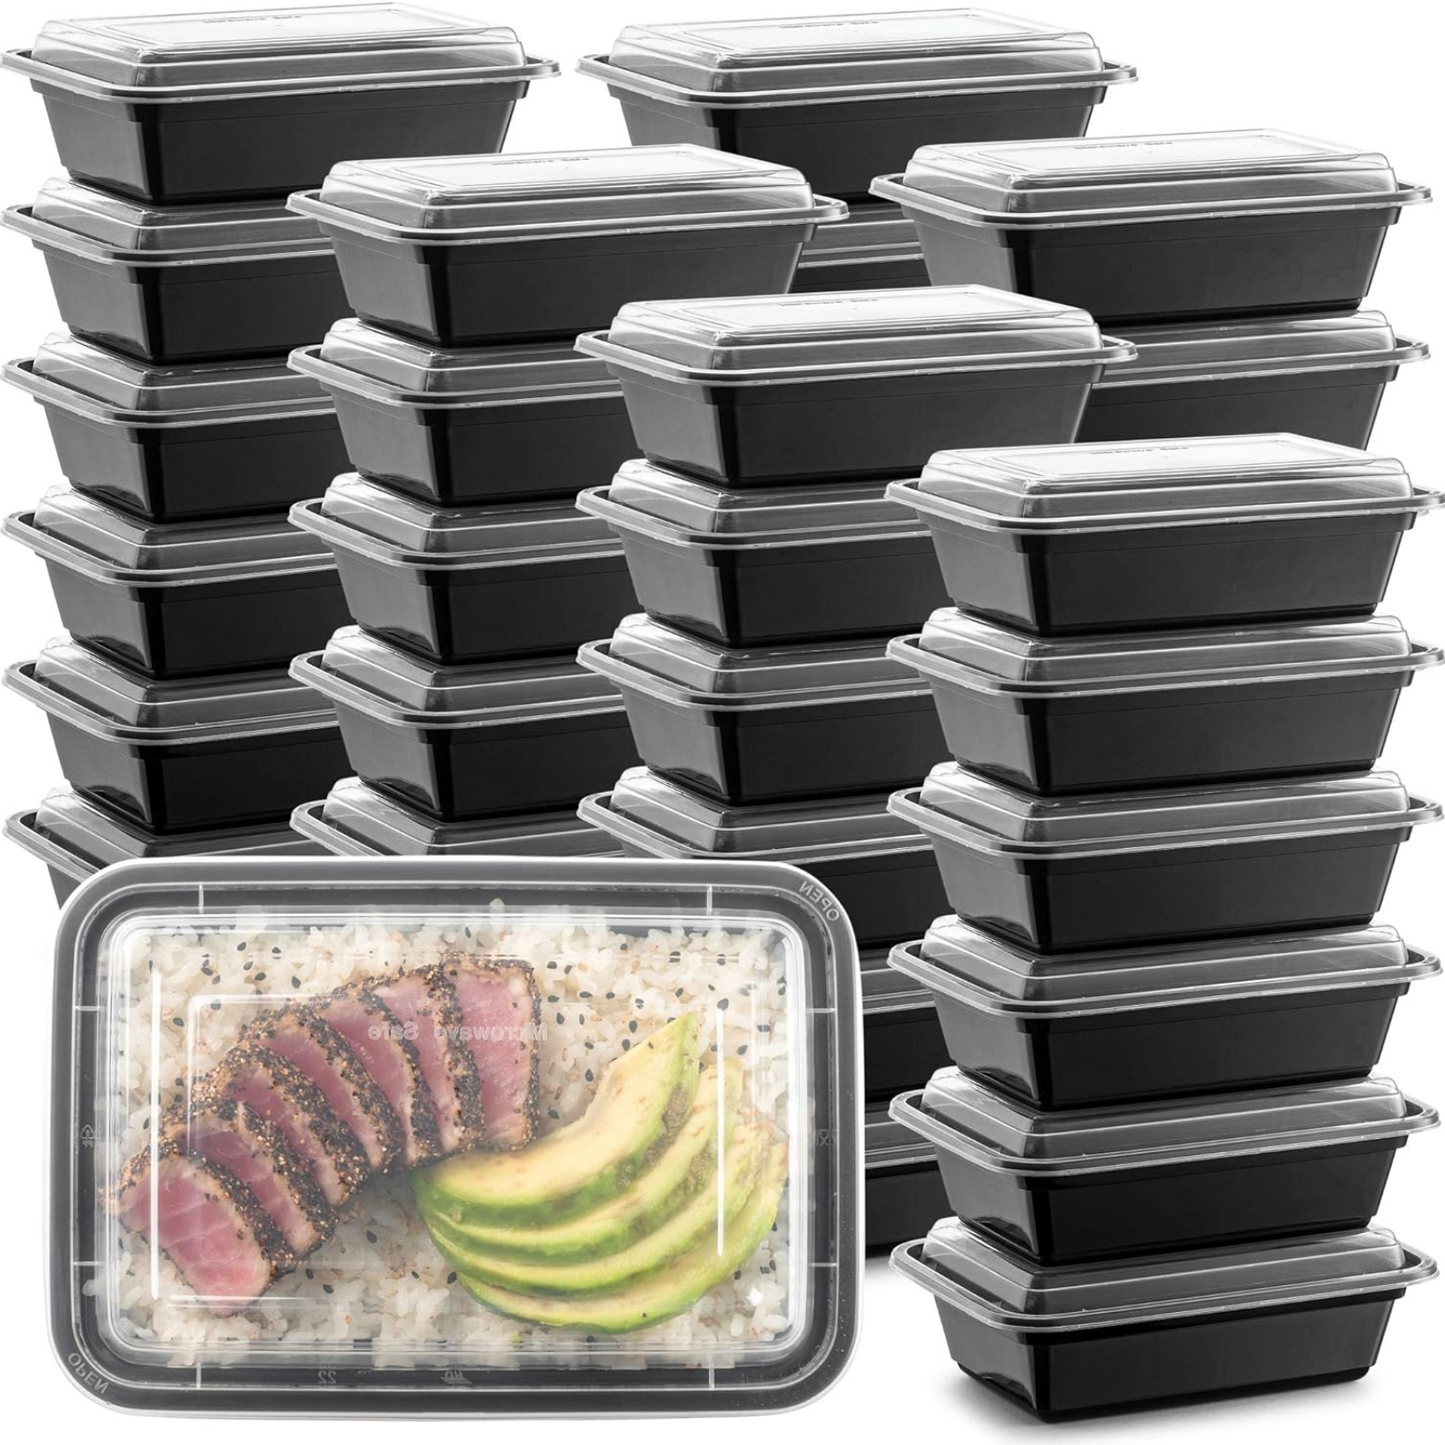 *WHOLESALE* 28oz. Black Rectangular Containers with clear lids | 150 ct/Case Food Storage & Serving VeZee   